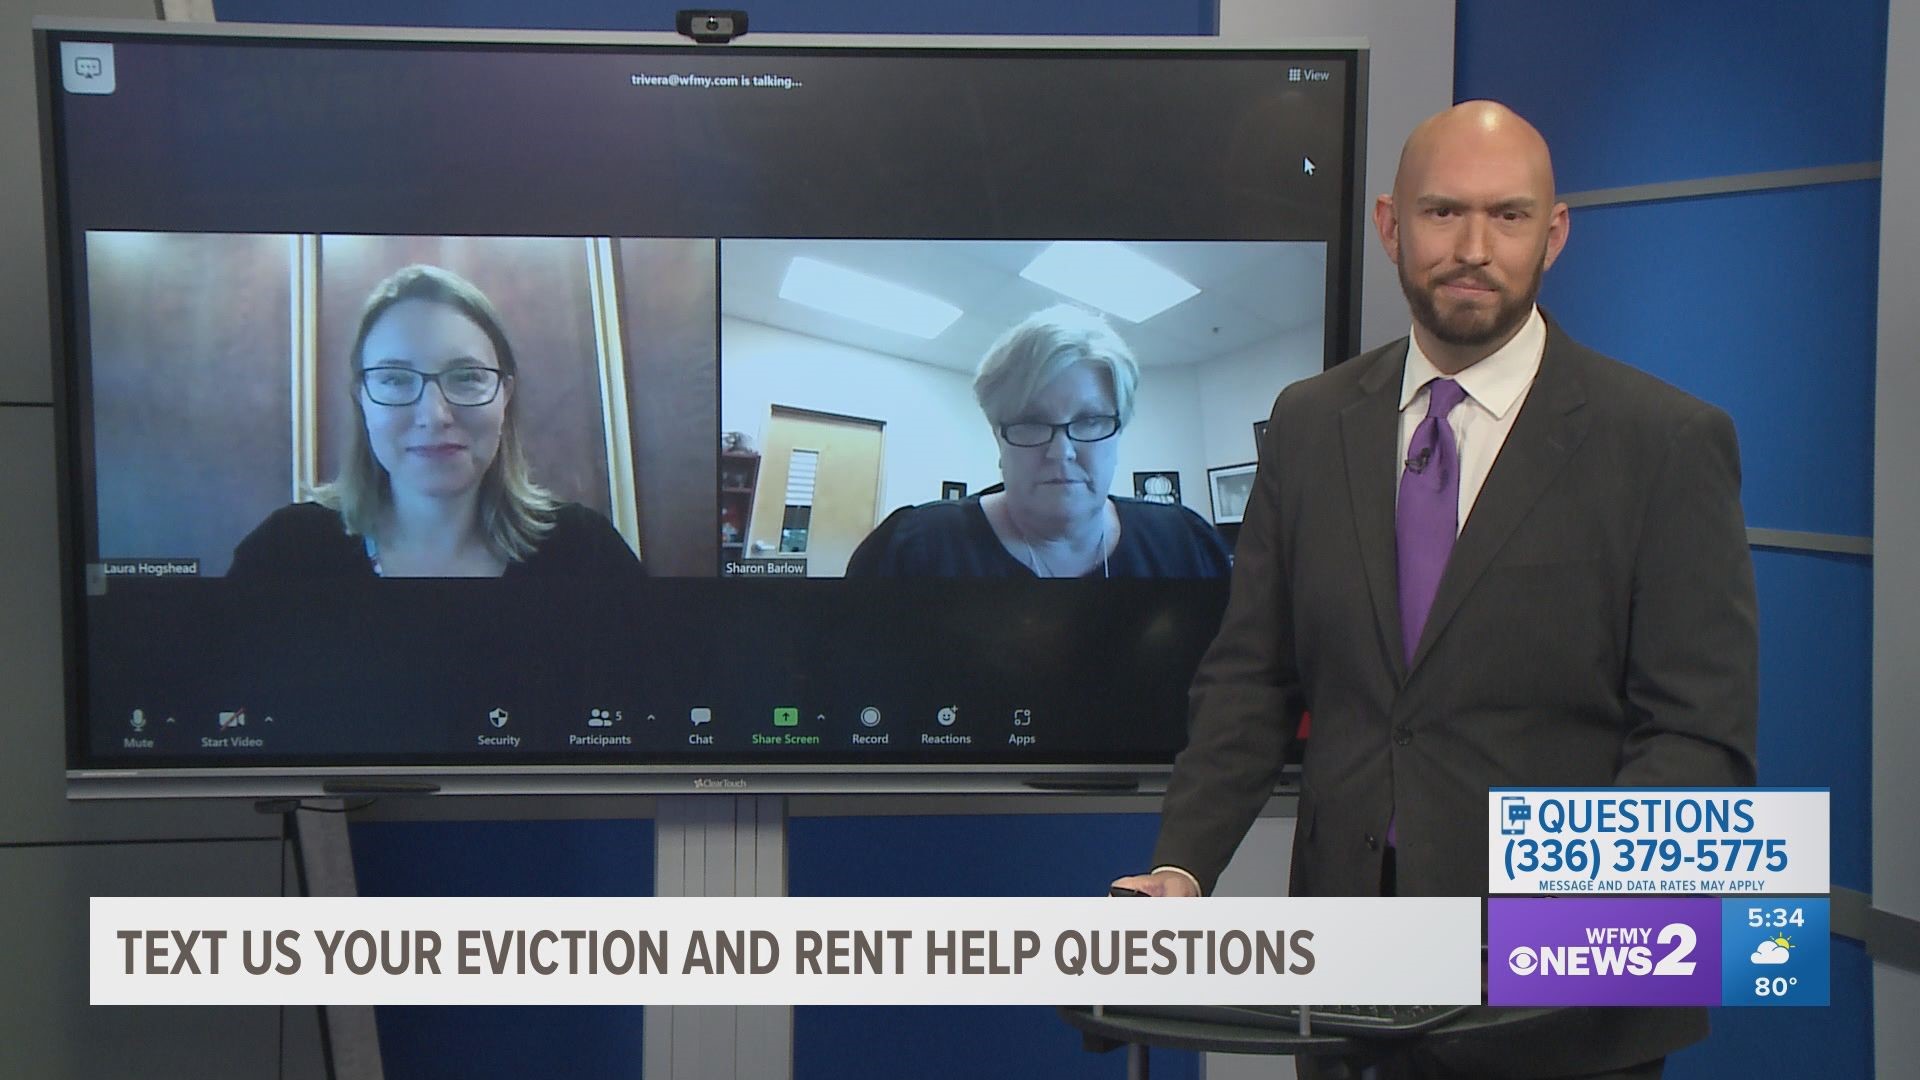 A panel of experts join us to answer your evictions and rent help questions.